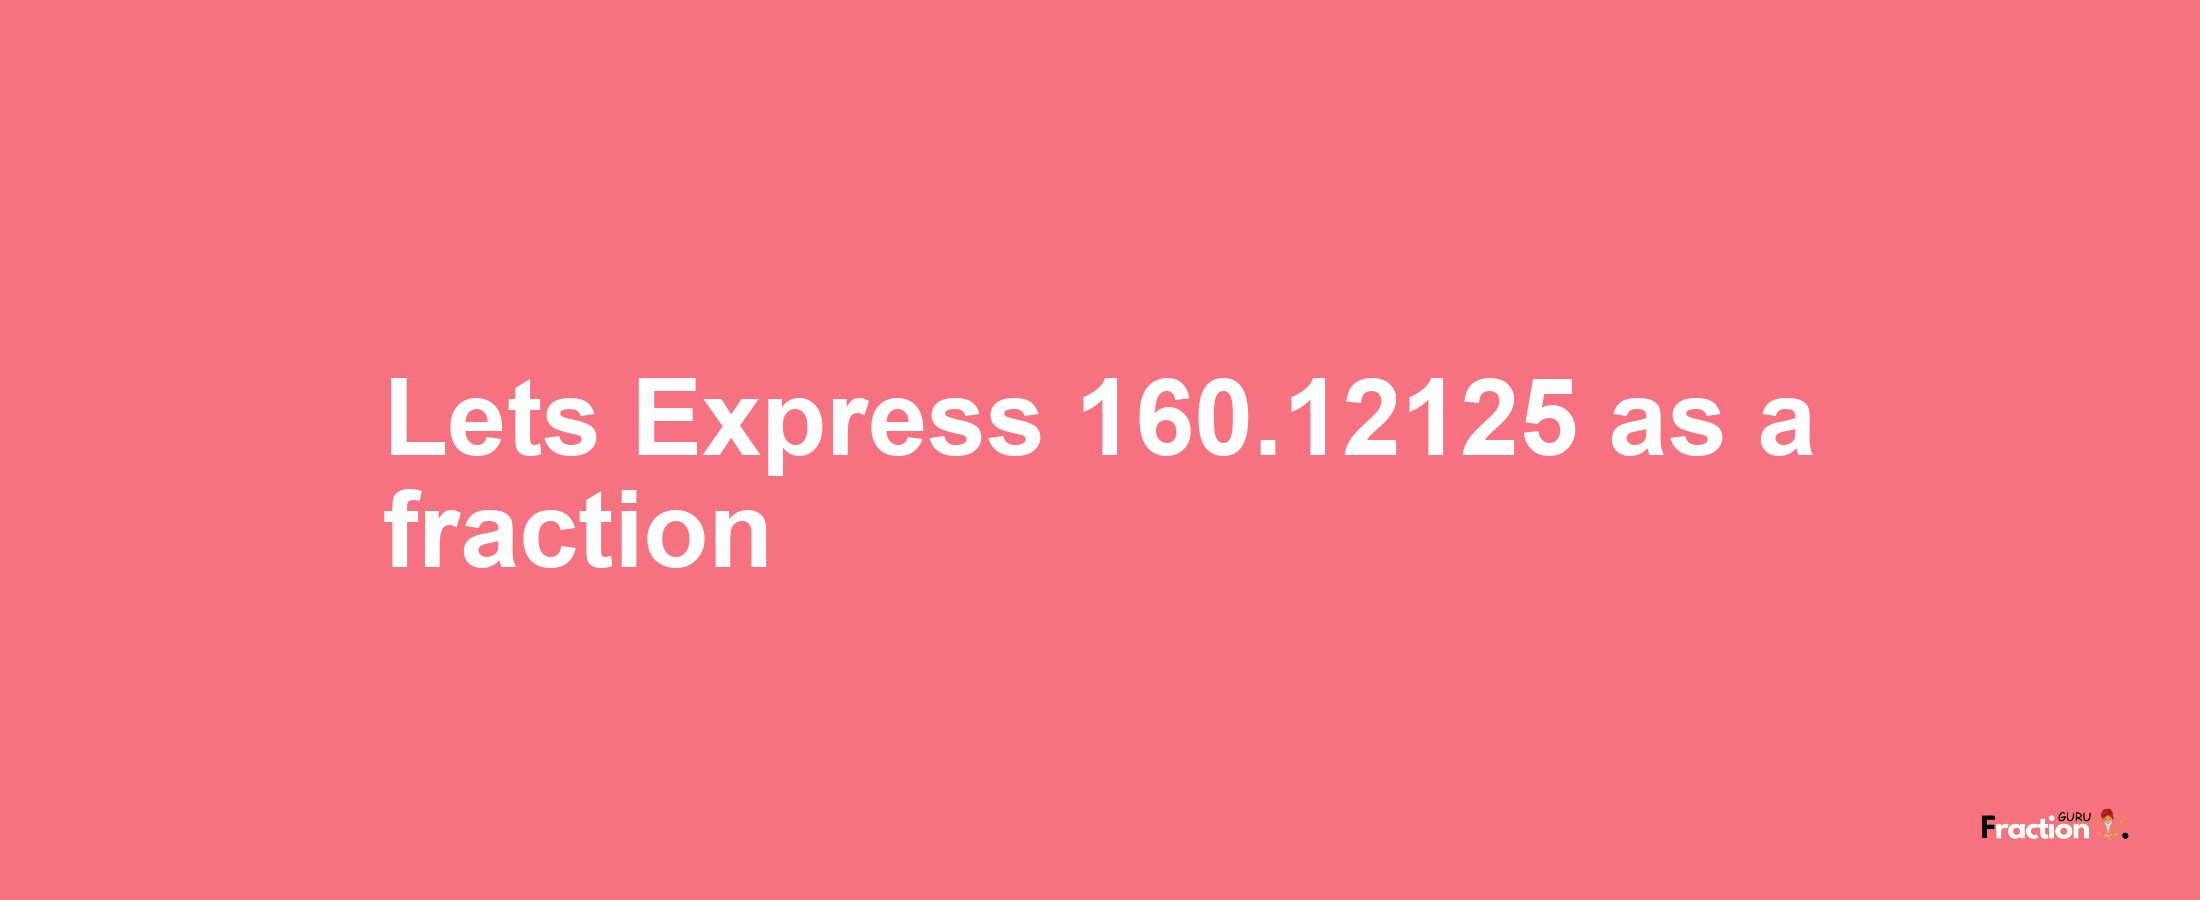 Lets Express 160.12125 as afraction